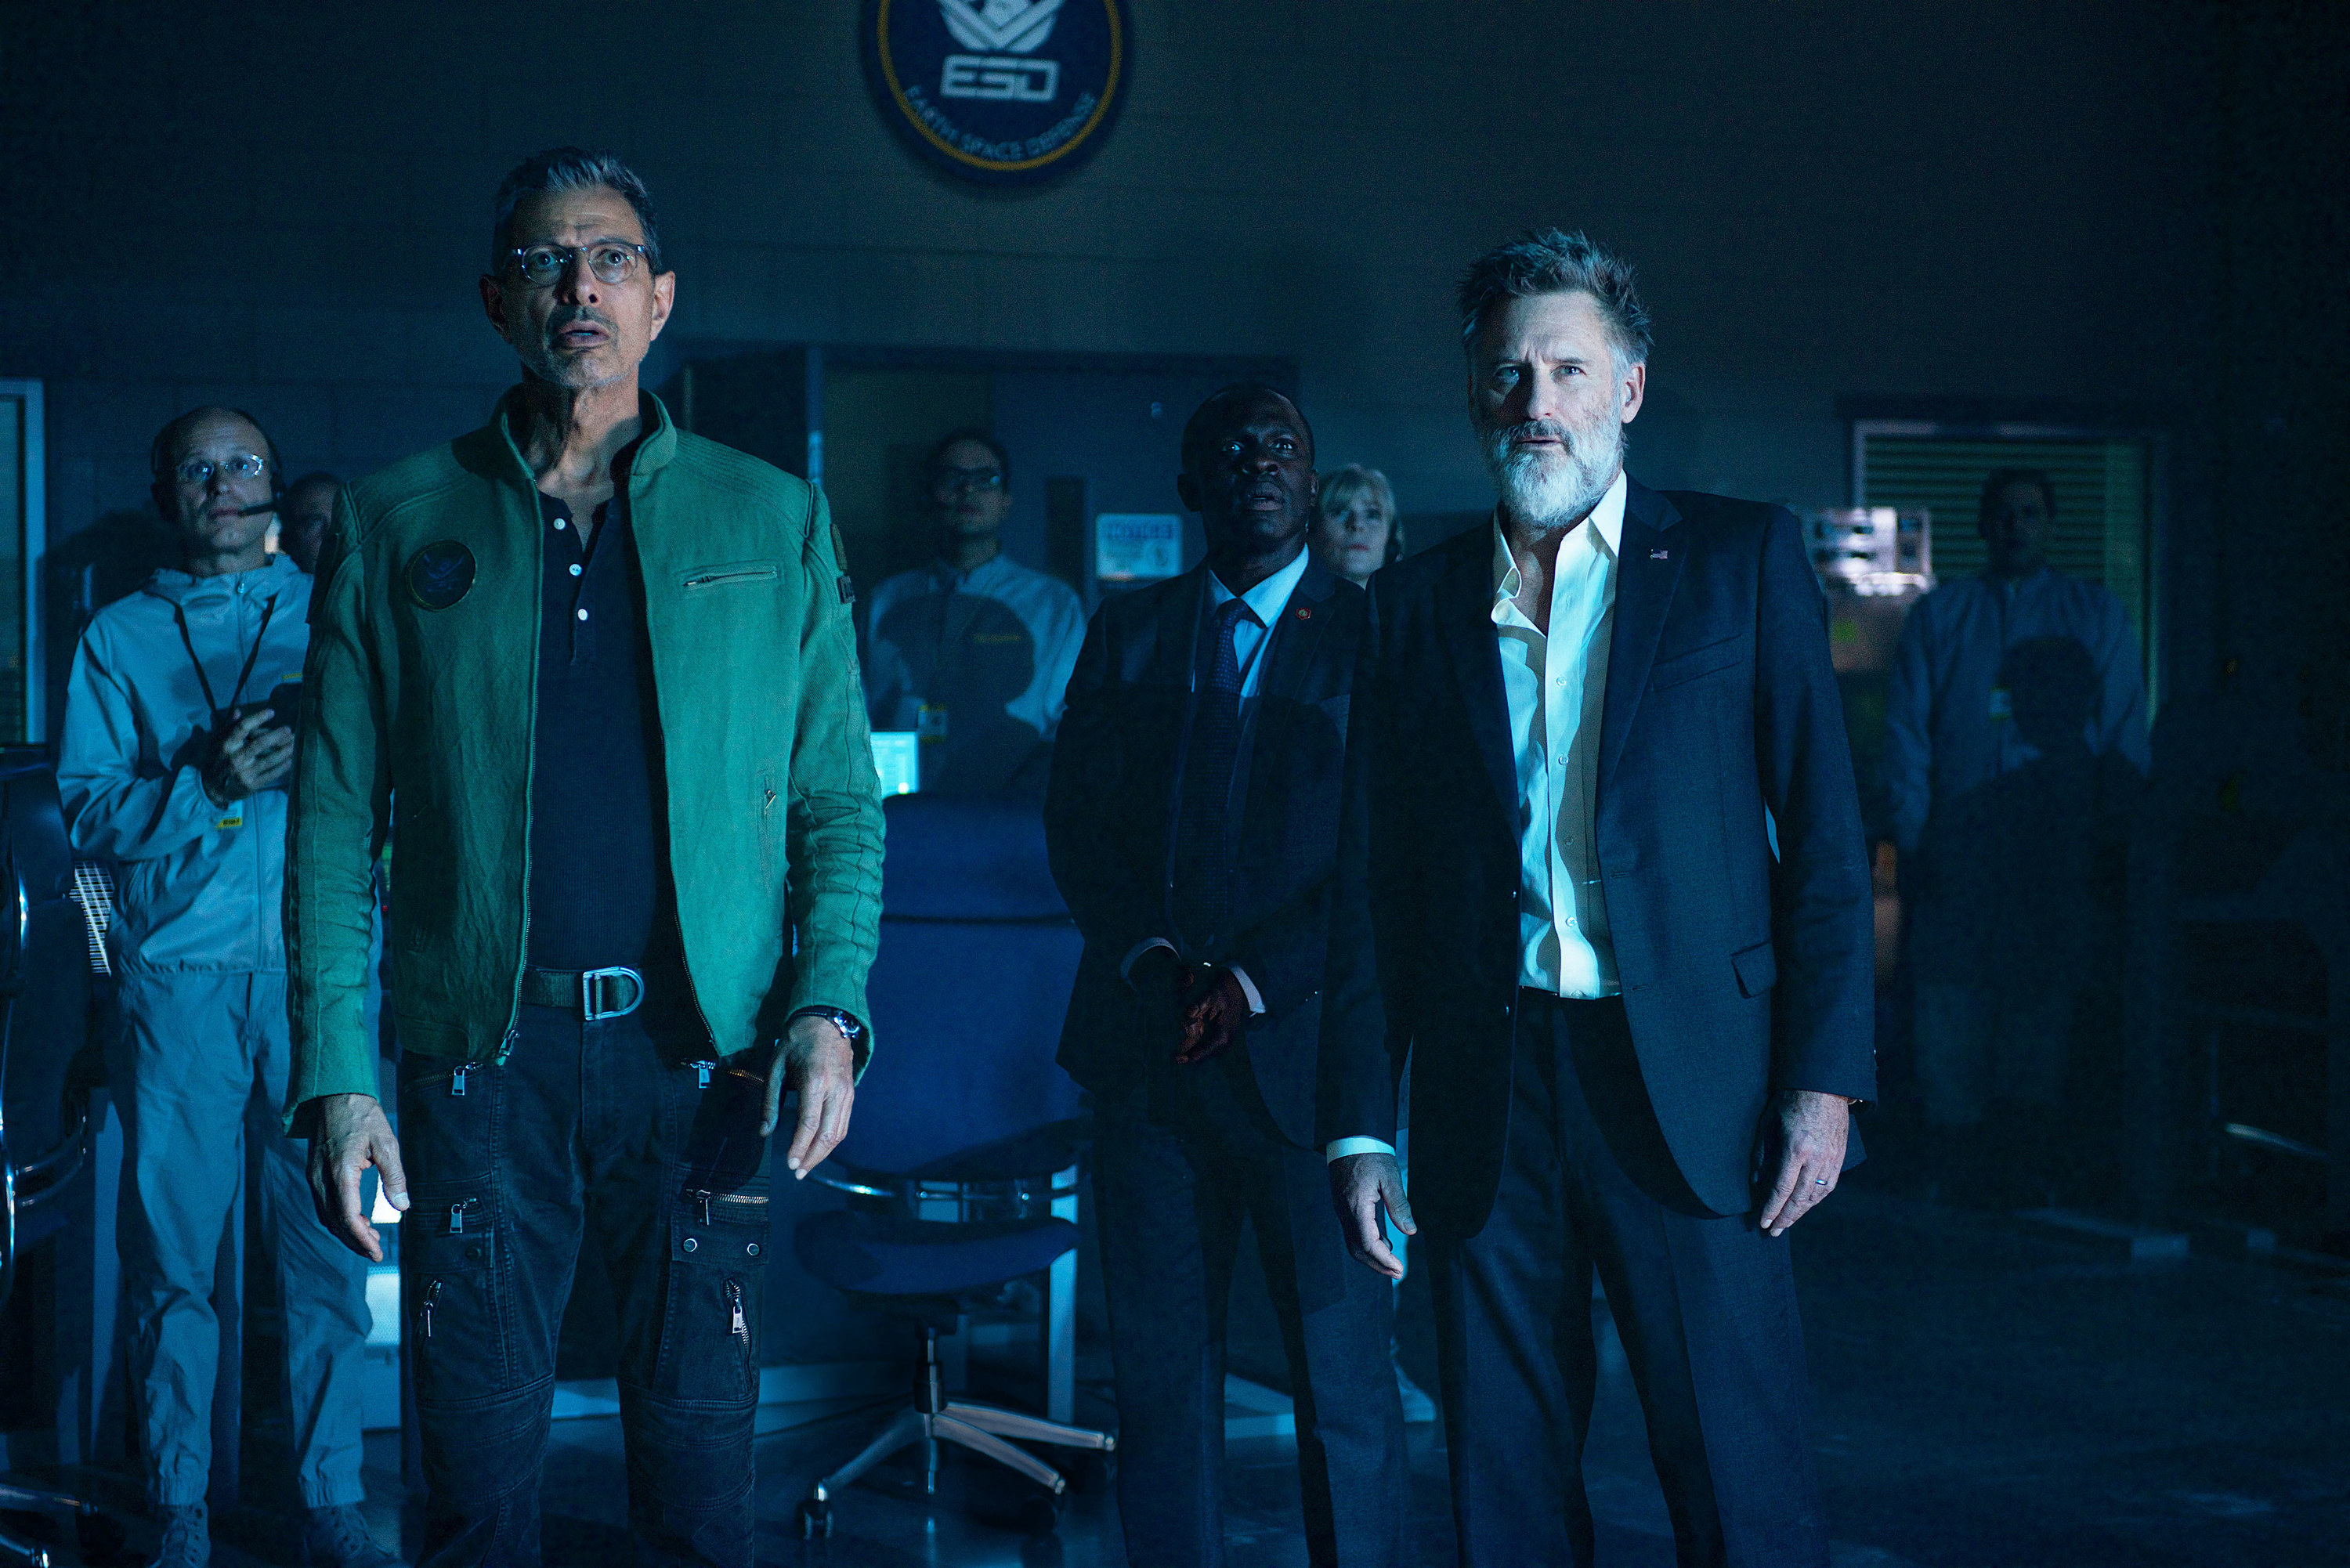 (L-R) Jeff Goldblum as David Levinson and Bill Pullman as President Whitmore in &quot;Independence Day: Resurgence&quot;